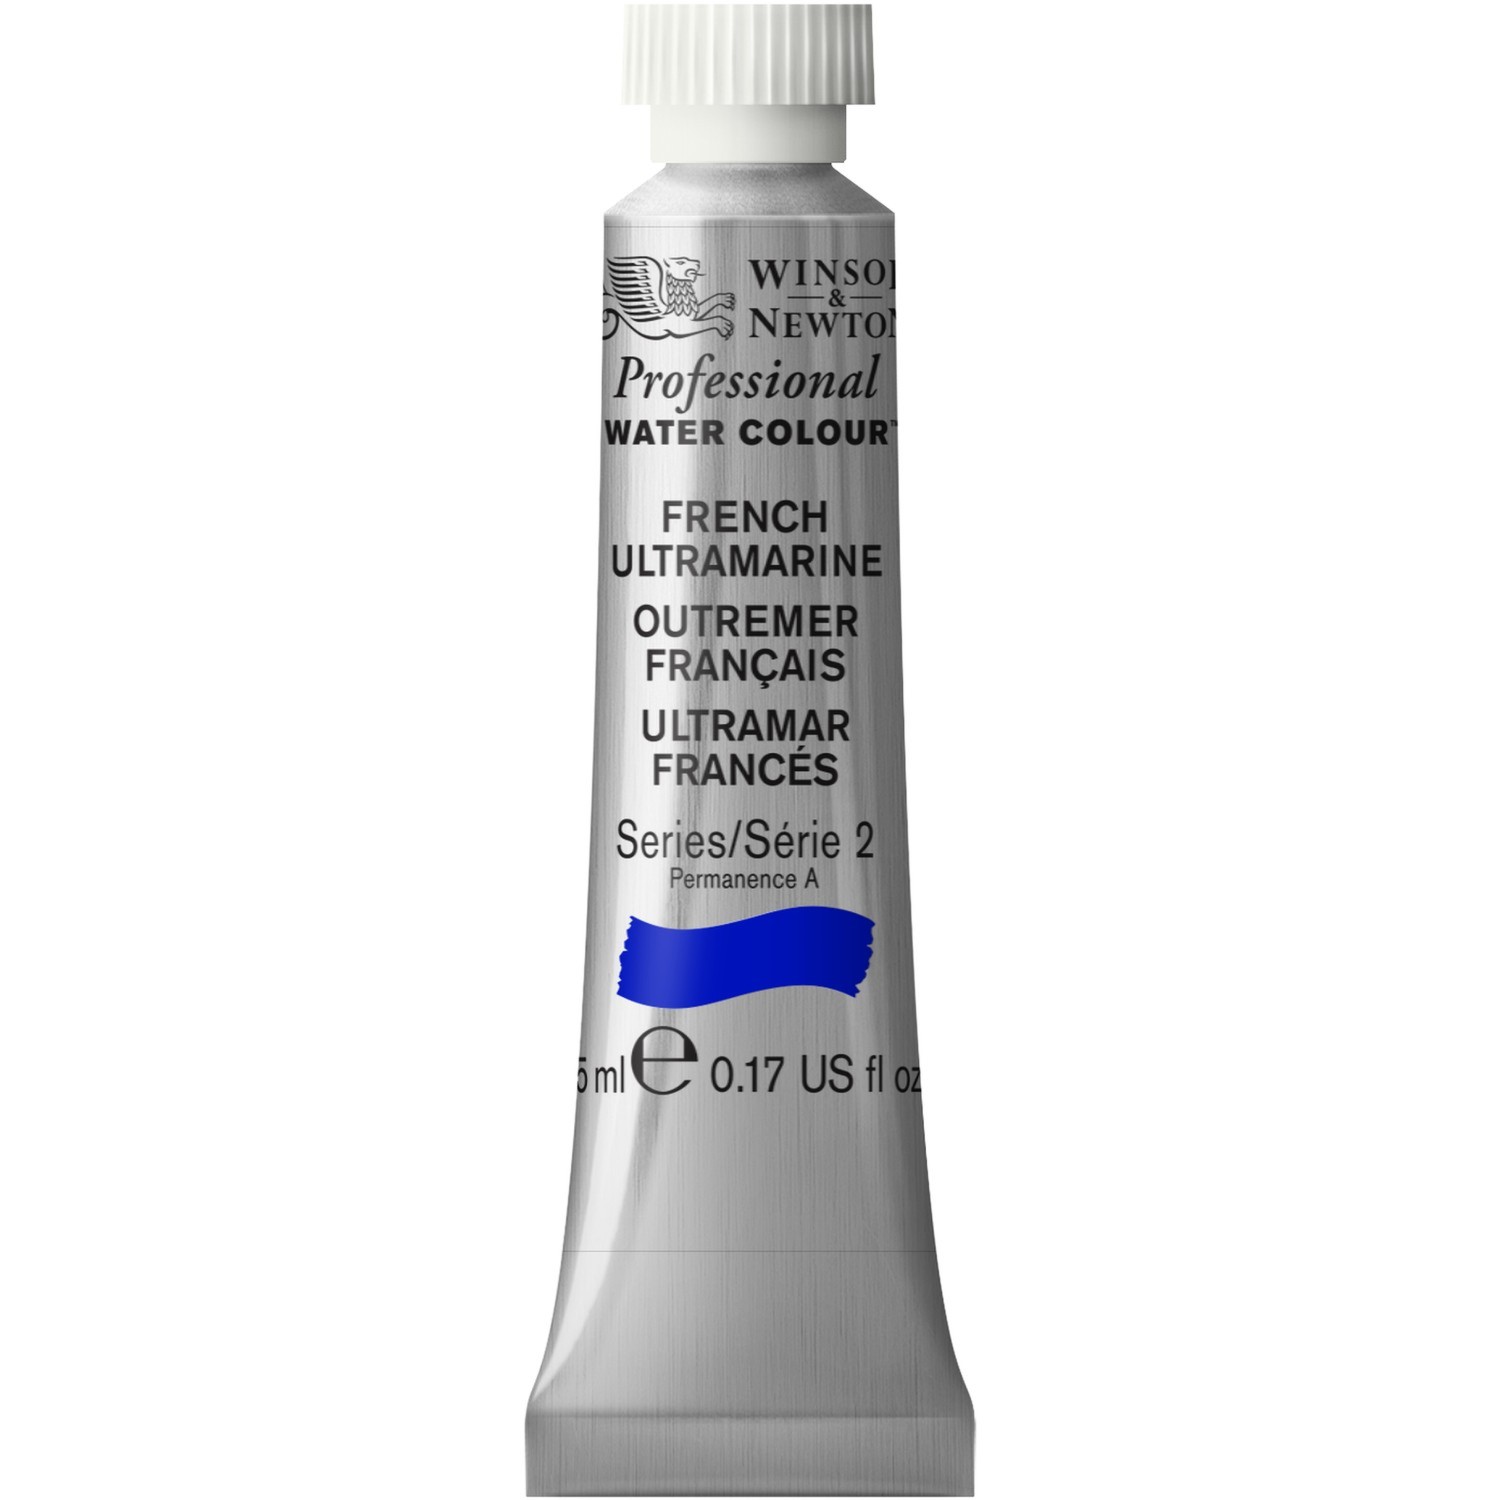 Winsor and Newton 5ml Professional Watercolour Paint - French Ultramarine Image 1